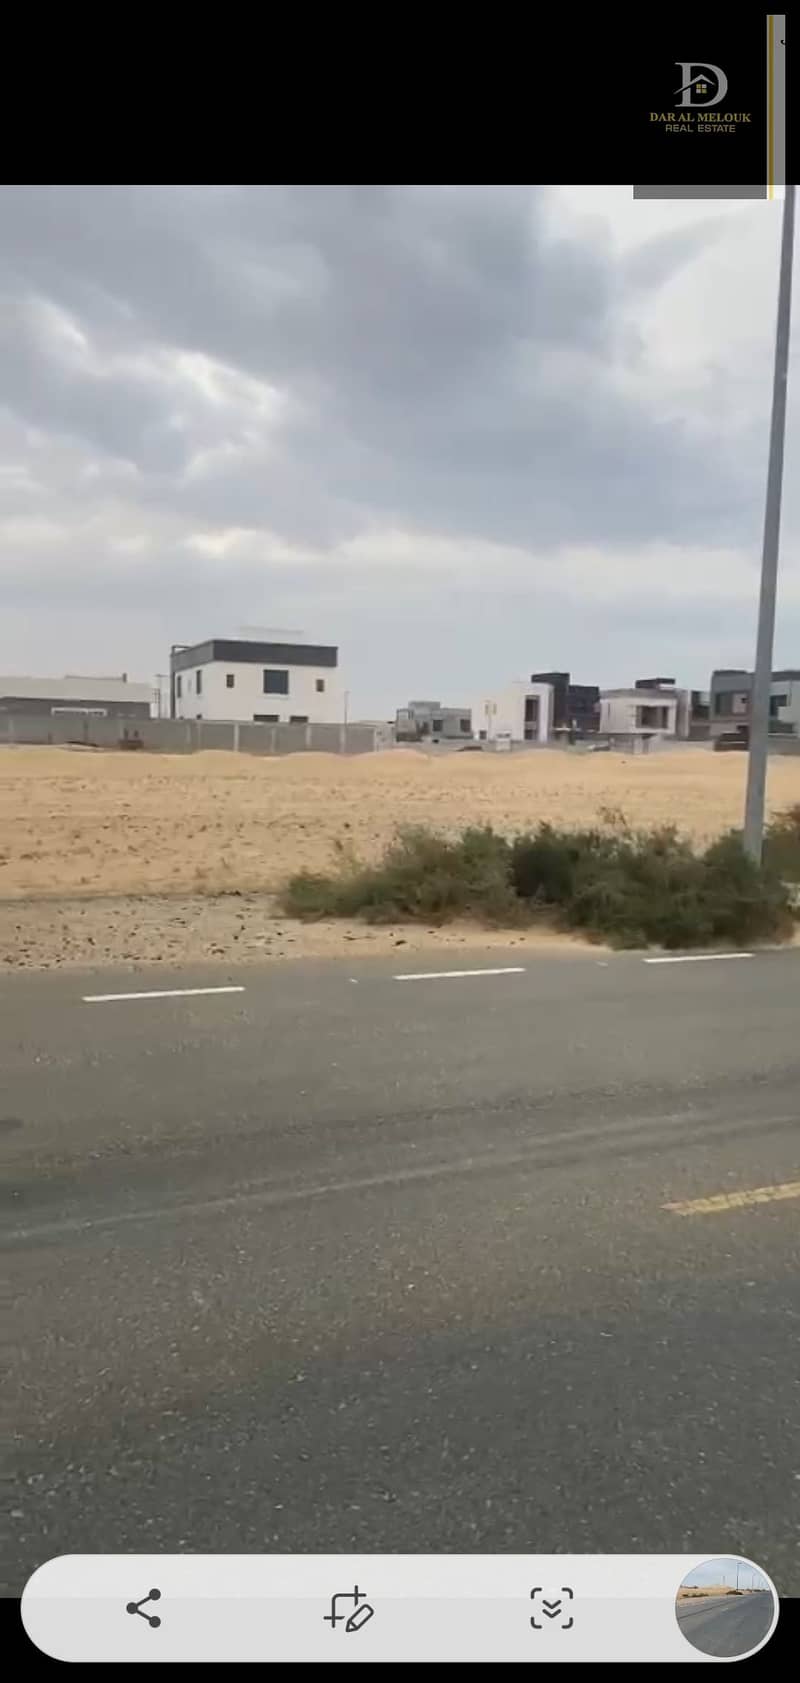 For sale in Sharjah, Al-Hoshi area, residential land, area of ​​10,000 feet, a permit for a ground and first villa, and two attached villas are declared. Freehold installments have been completed. All Arab nationalities. Excellent location on two streets,